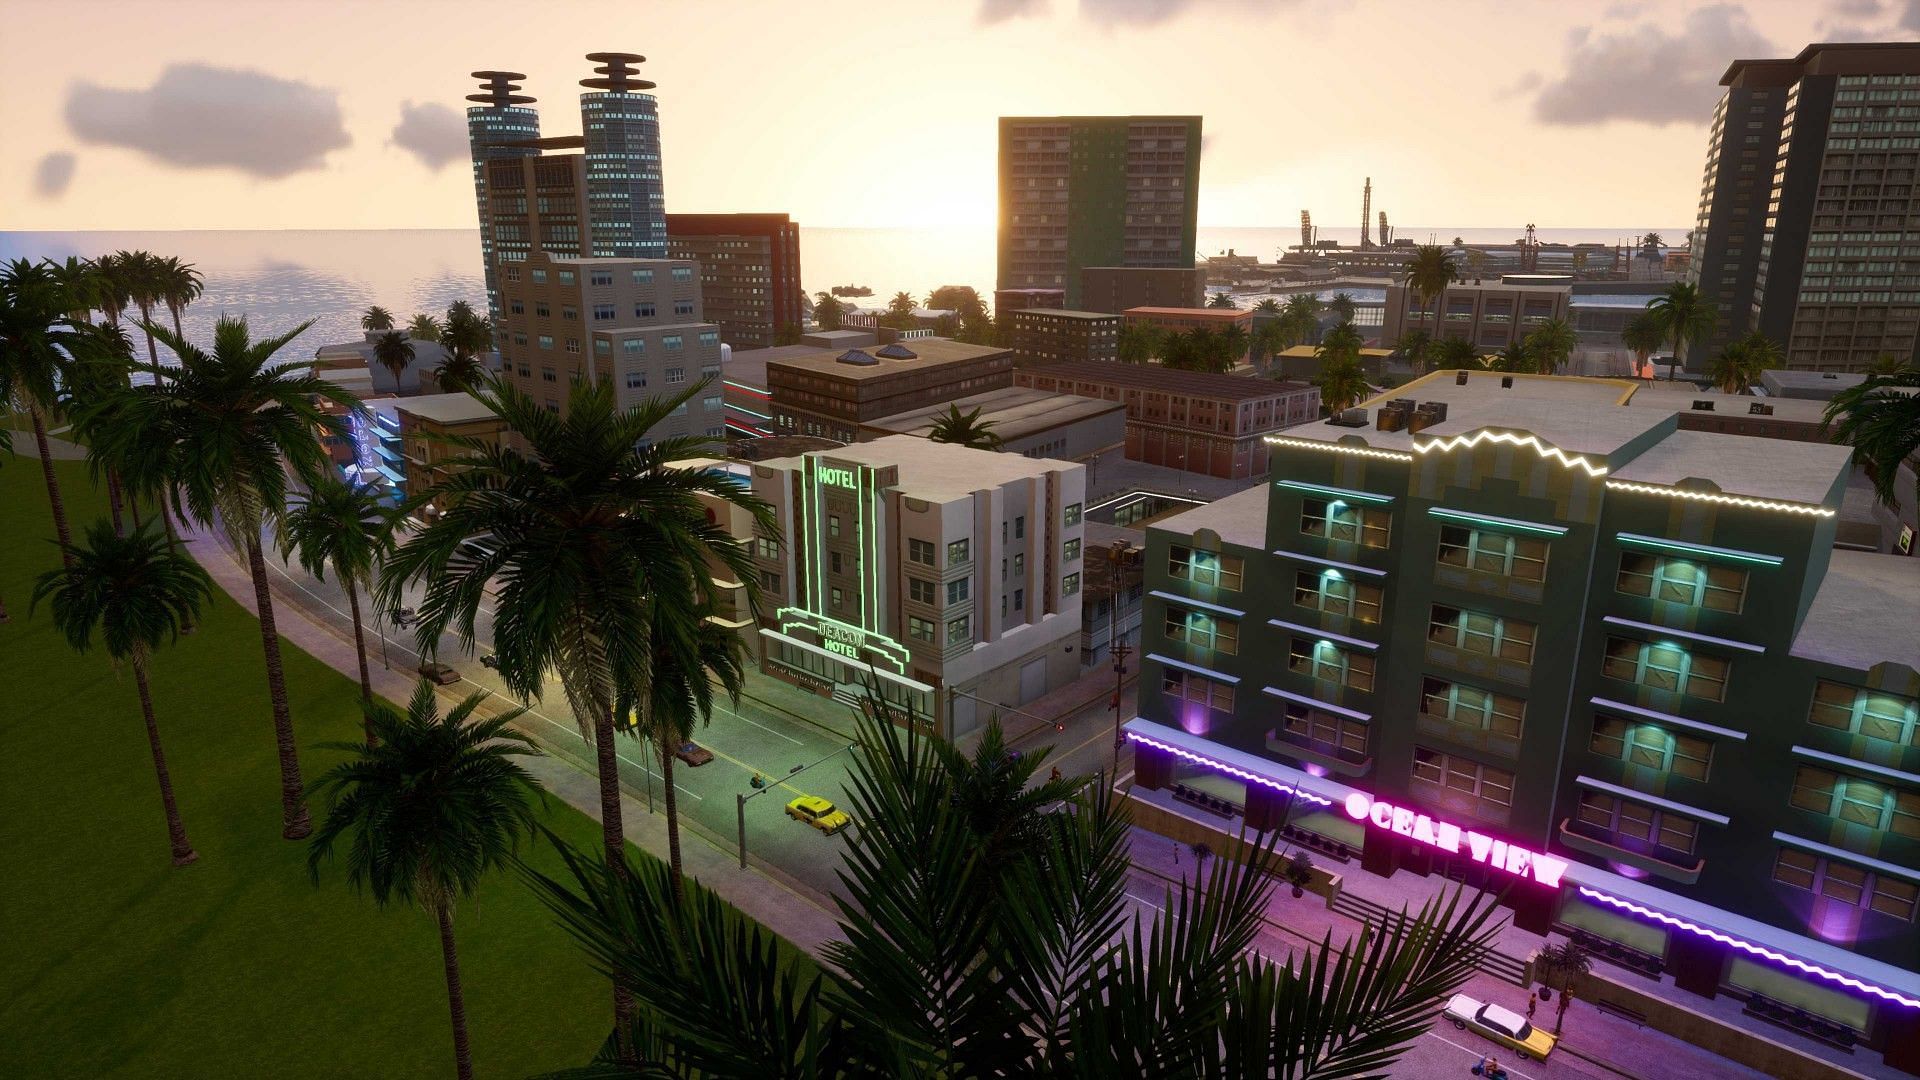 GTA 6 is known to take place in Vice City, making some recommendations rather obvious